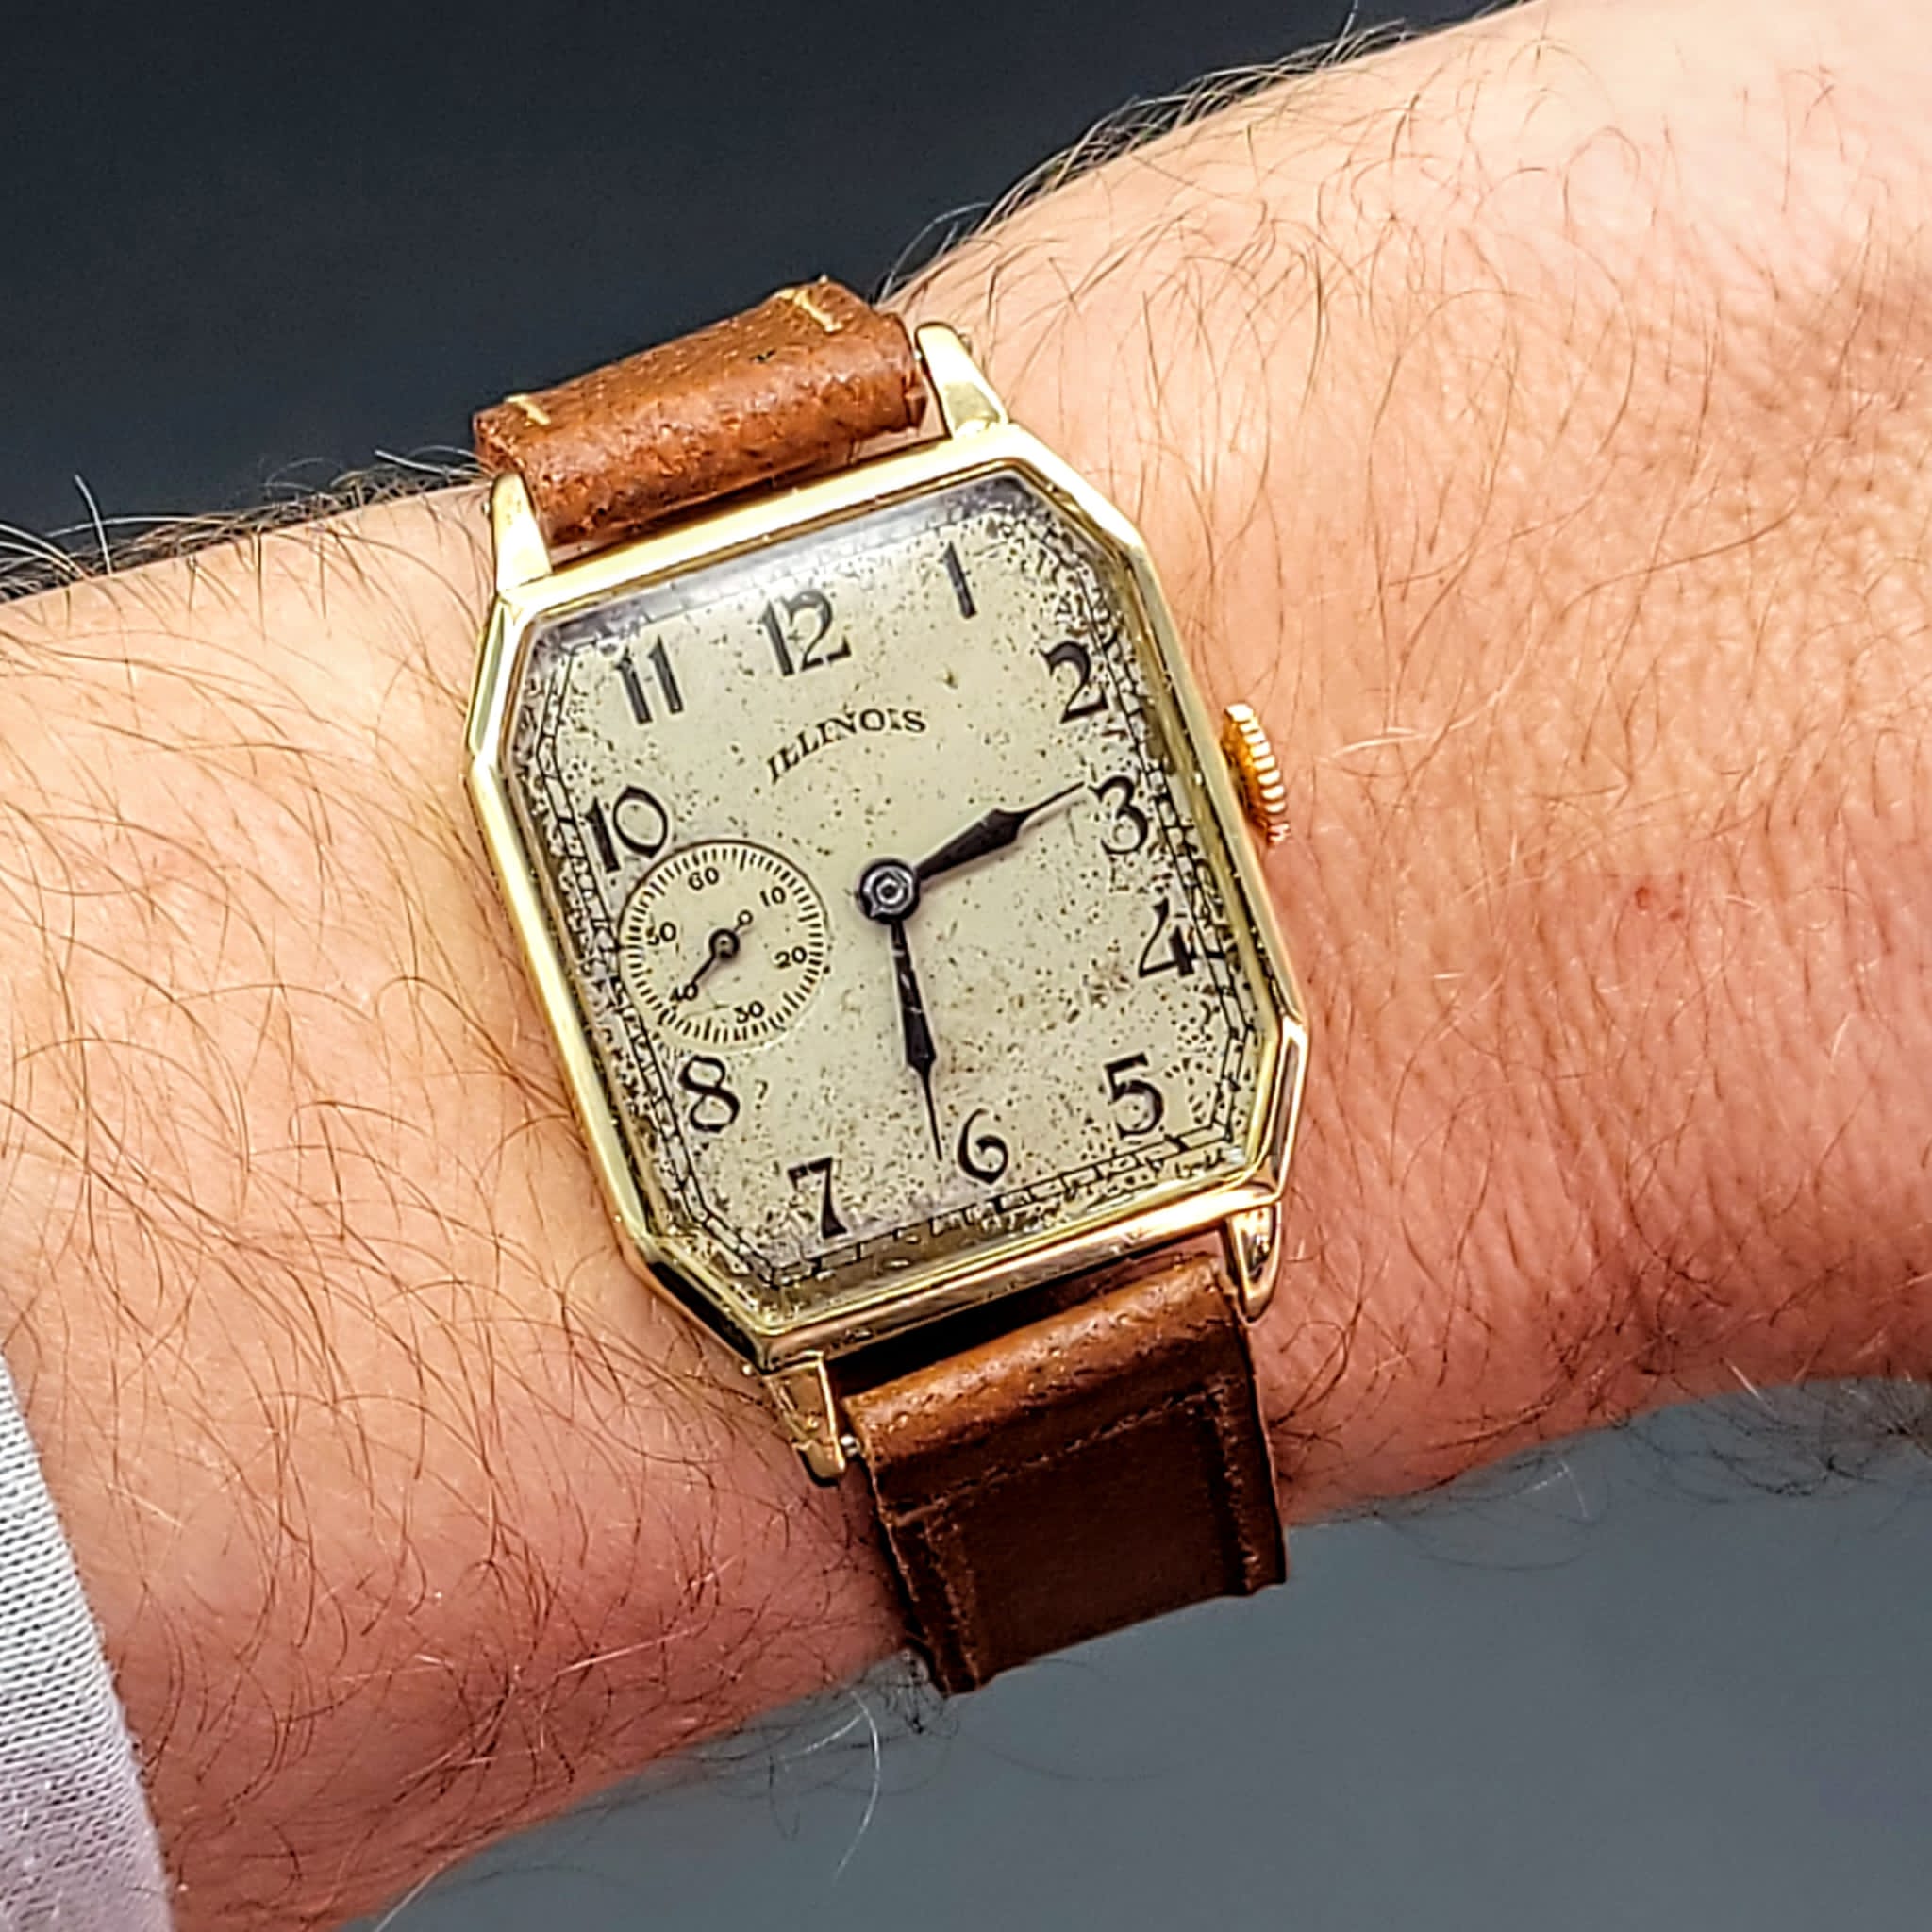 1929 ILLINOIS Canby Watch "Rectangle Plane" Grade 905